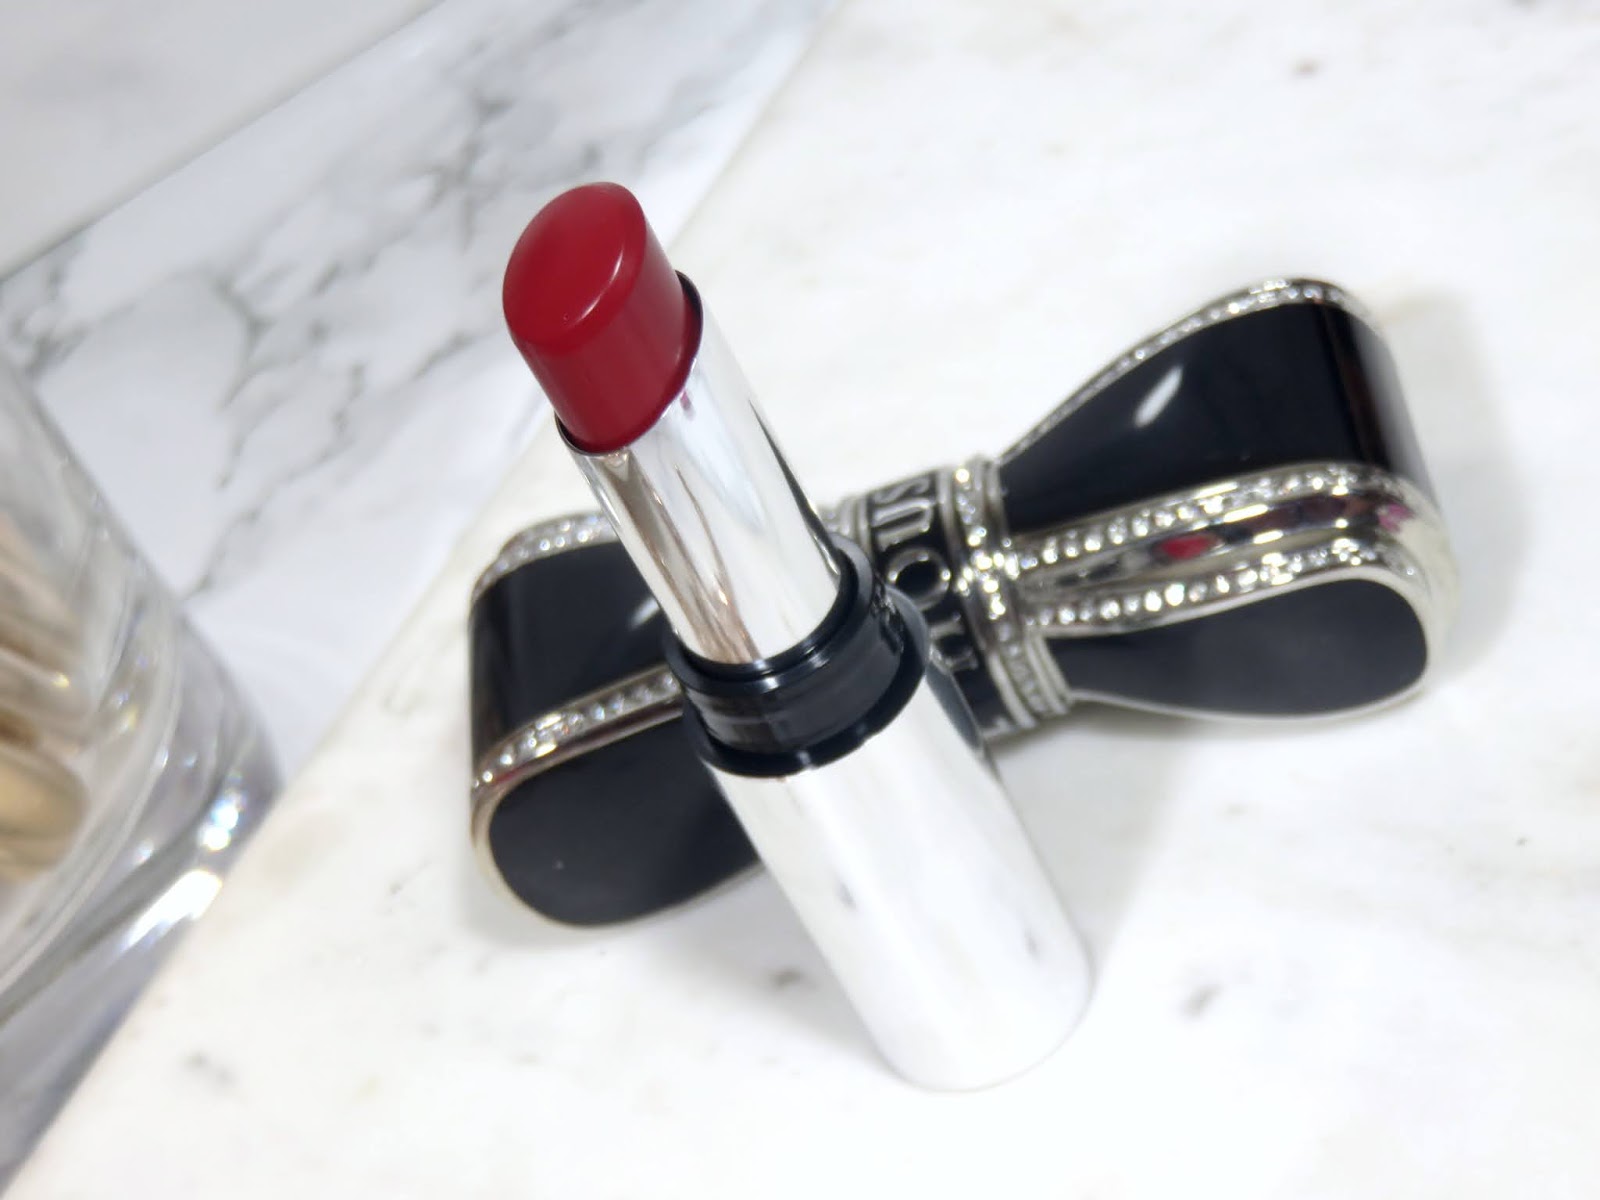 House of Sillage Diamond Powder Satin Lipstick Cruise Collection Review and Swatches